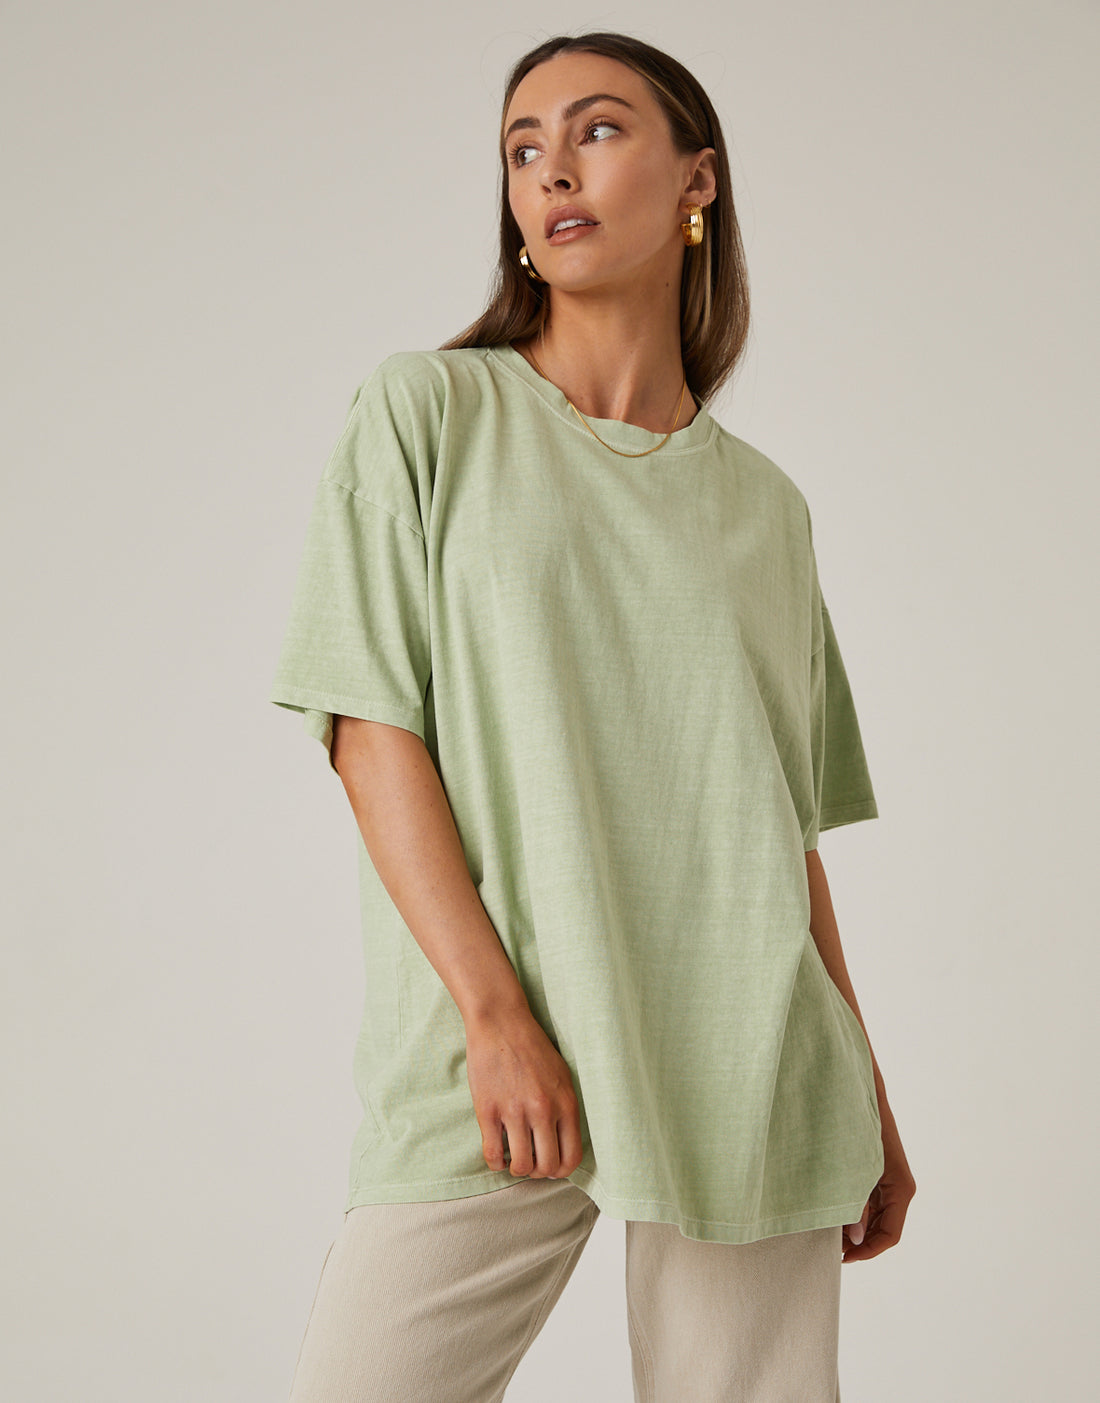 Comfy Oversized Tee Tops Green S/M -2020AVE